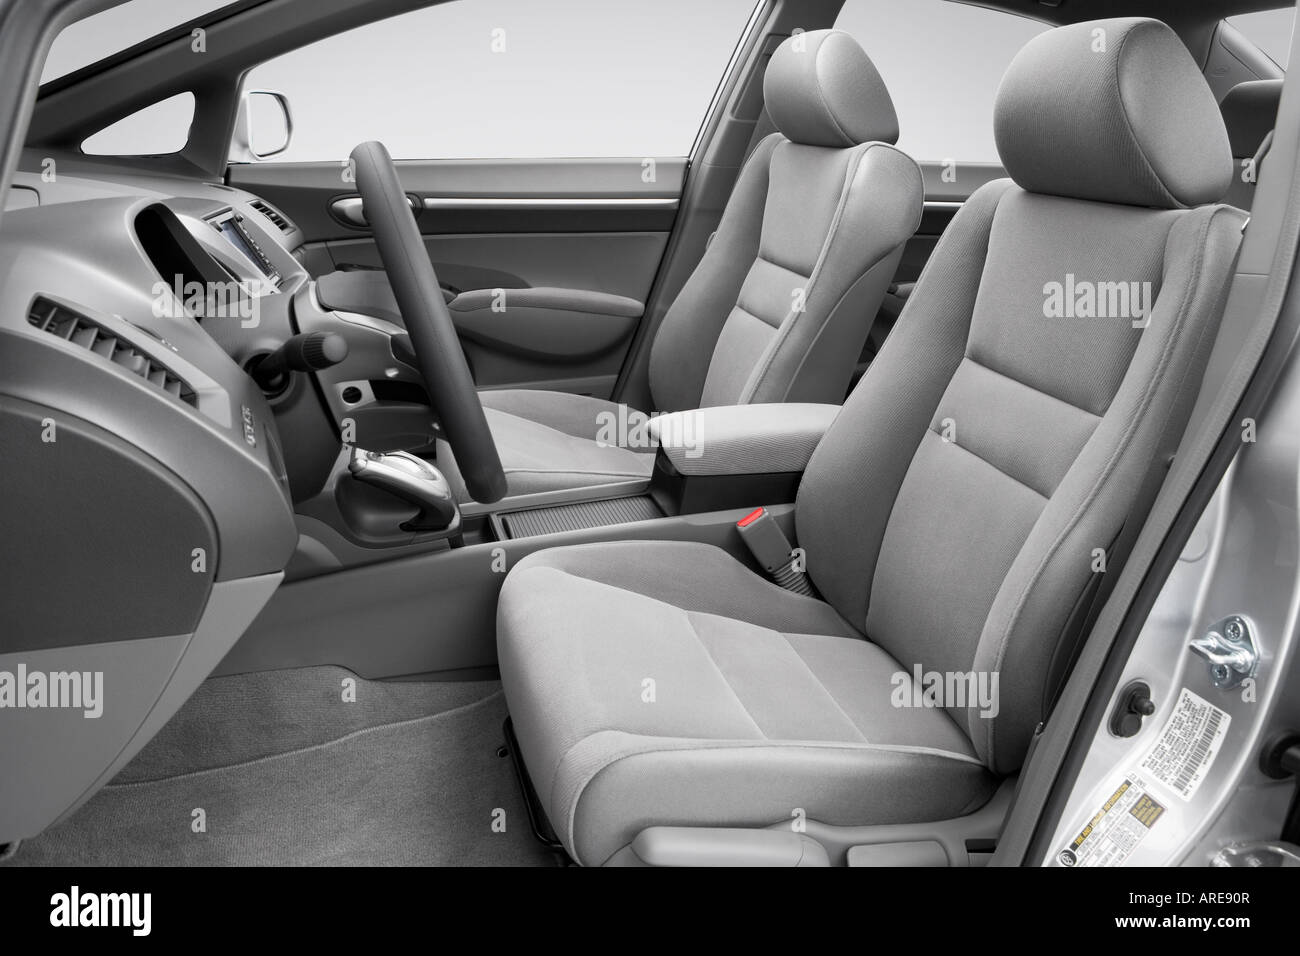 2006 Honda Civic Ex In Silver Front Seats Stock Photo